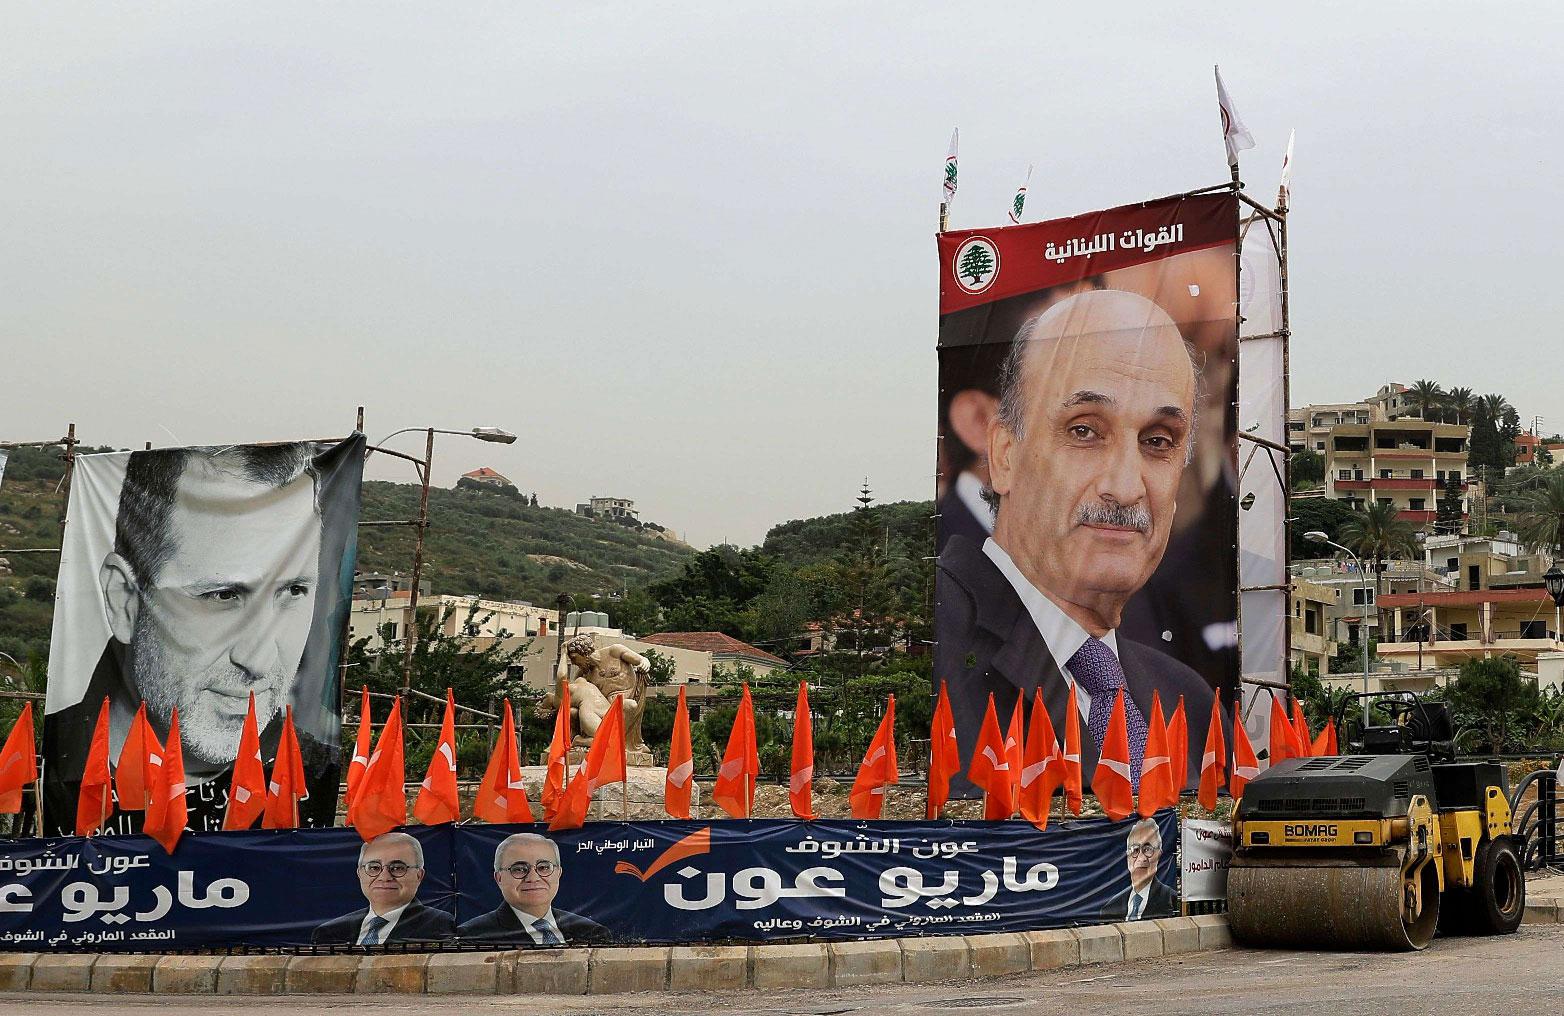 Portraits of the Free Patriotic Movement (FPM) candidate, Foreign Minister Gibran Bassil (L) and the leader of the rival Christian Lebanese forces (LF) group, Samir Geagea (R).